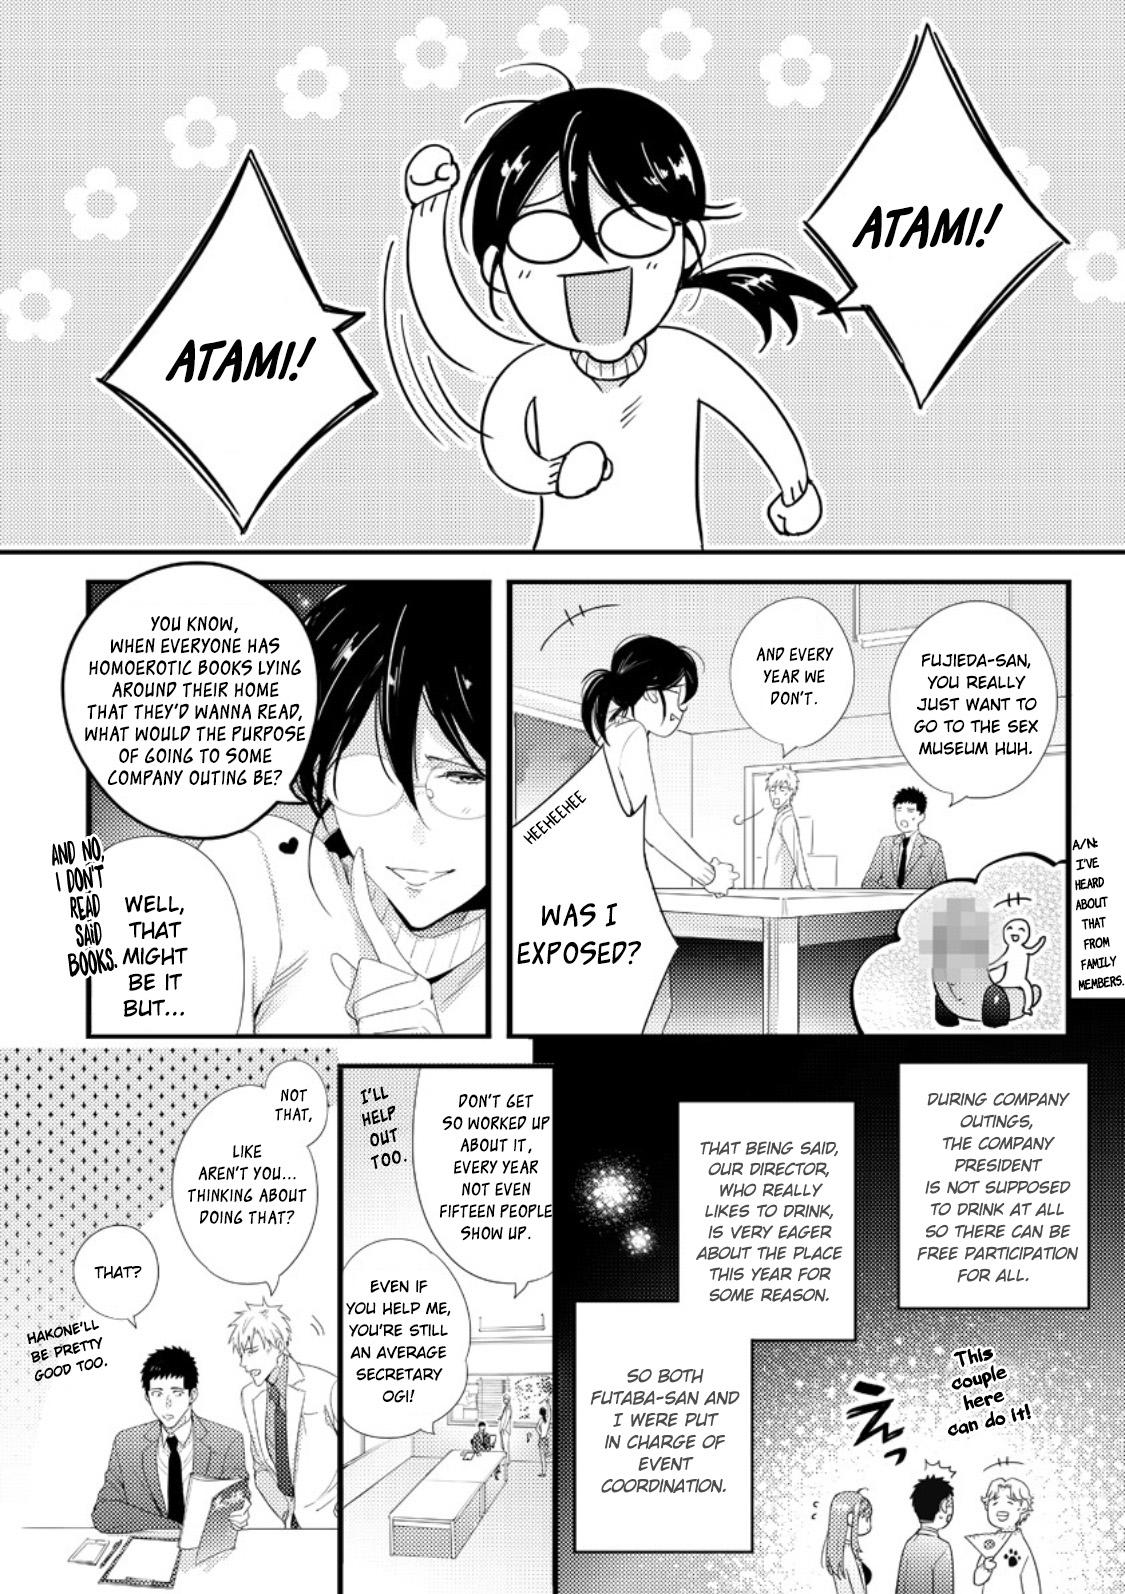 Parties Please Let Me Hold You Futaba-san! Woman - Page 4